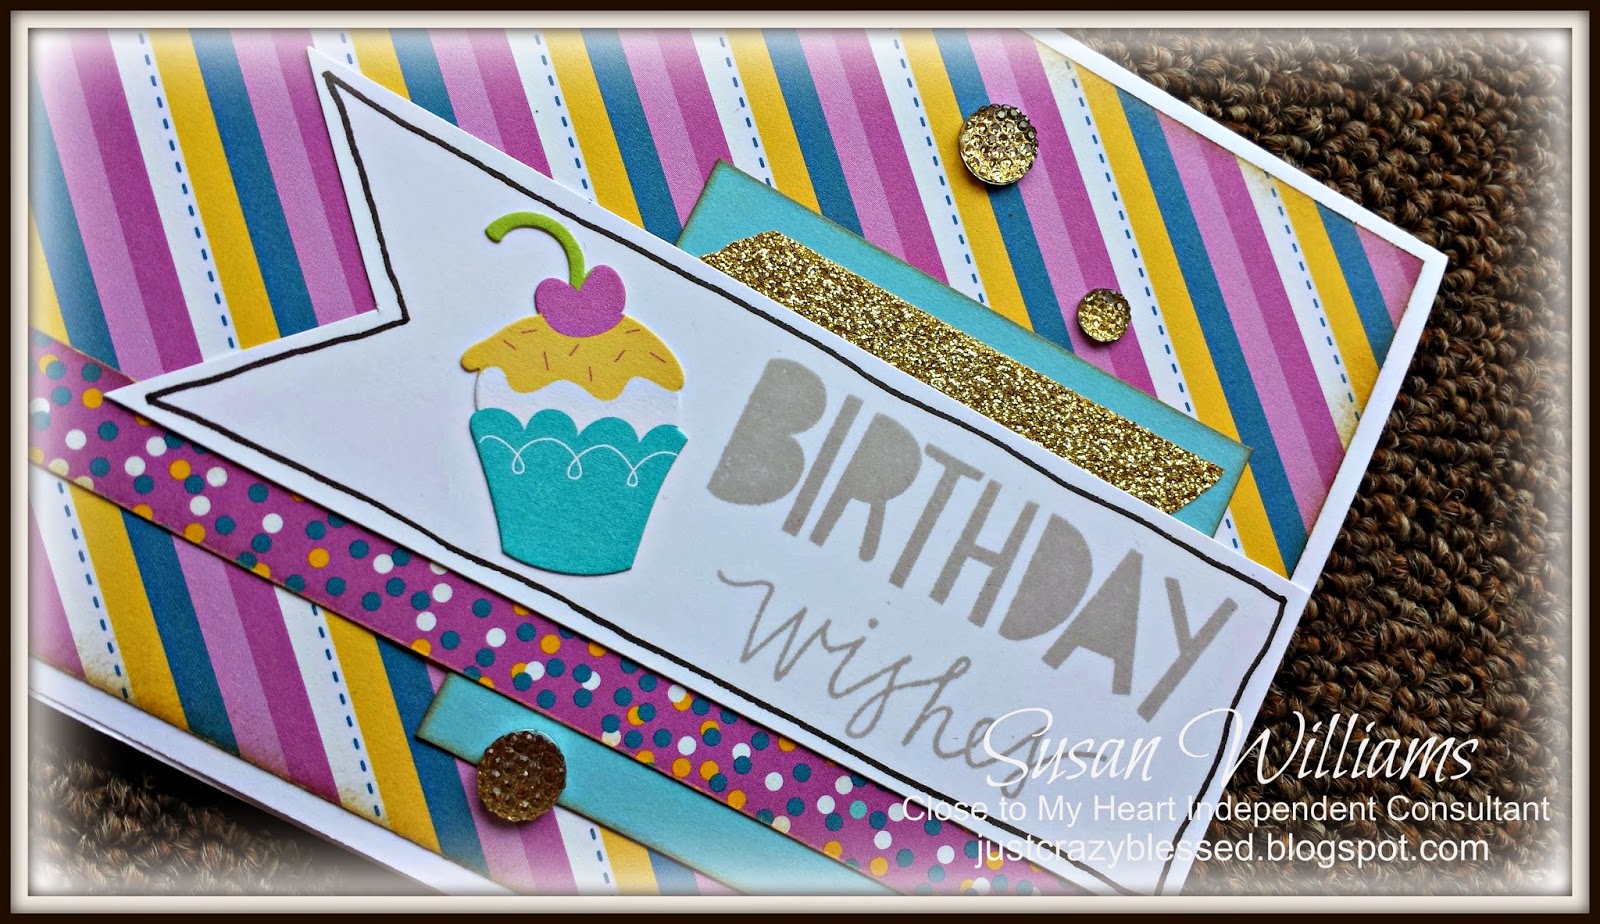 Just Crazy Blessed : 'Confetti Wishes' Display Board Kit!